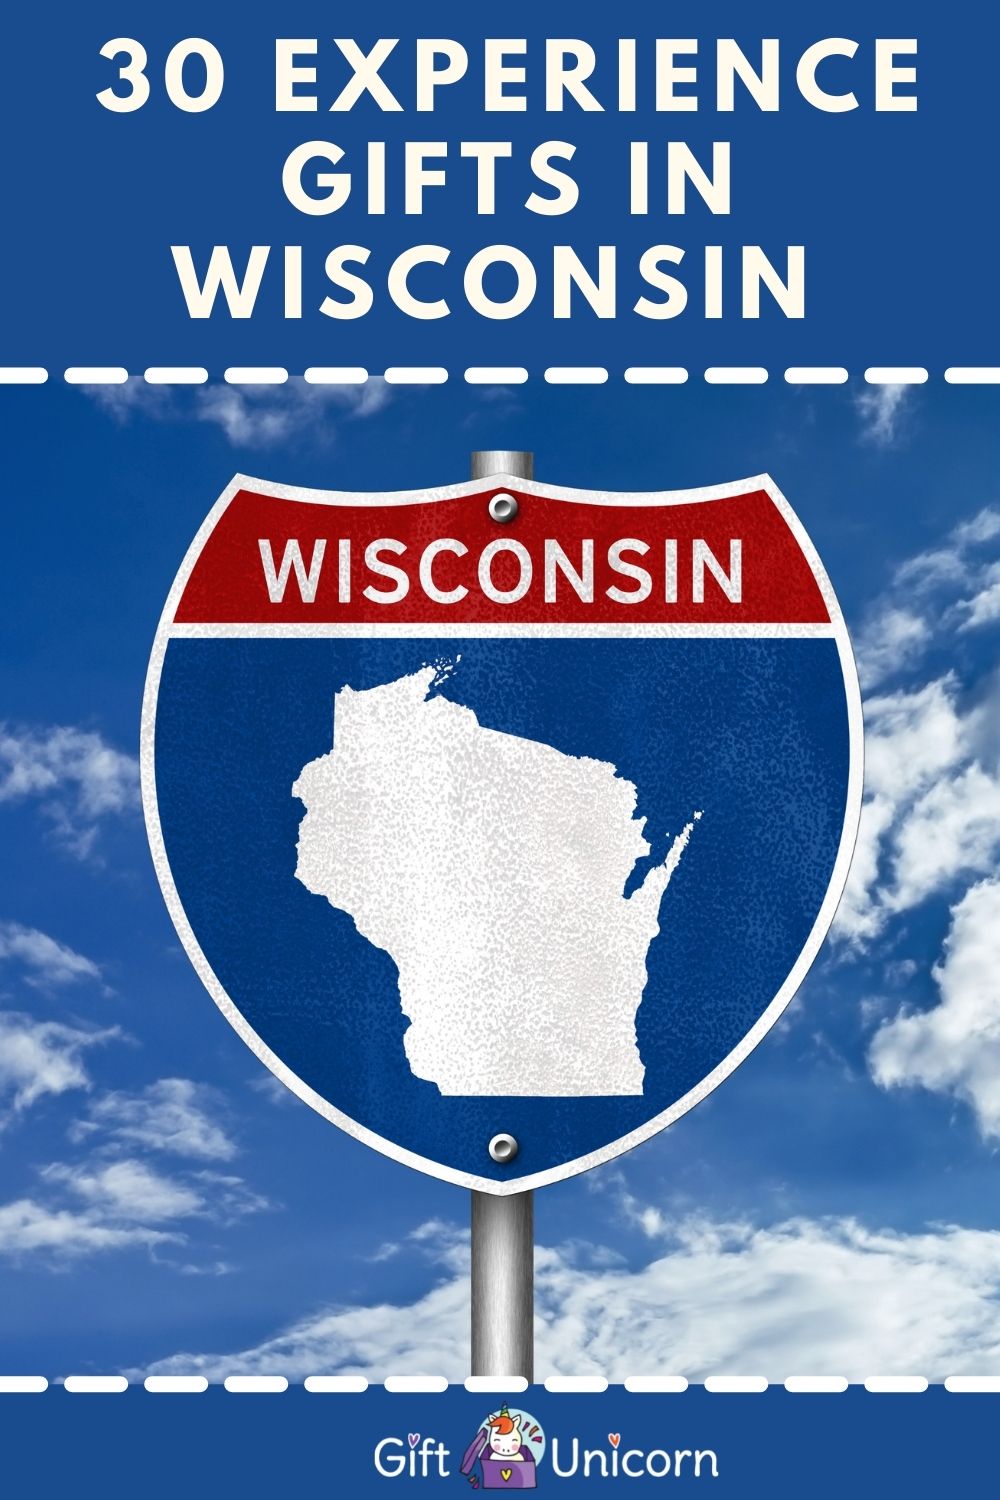 30 experience gifts in Wisconsin pin image